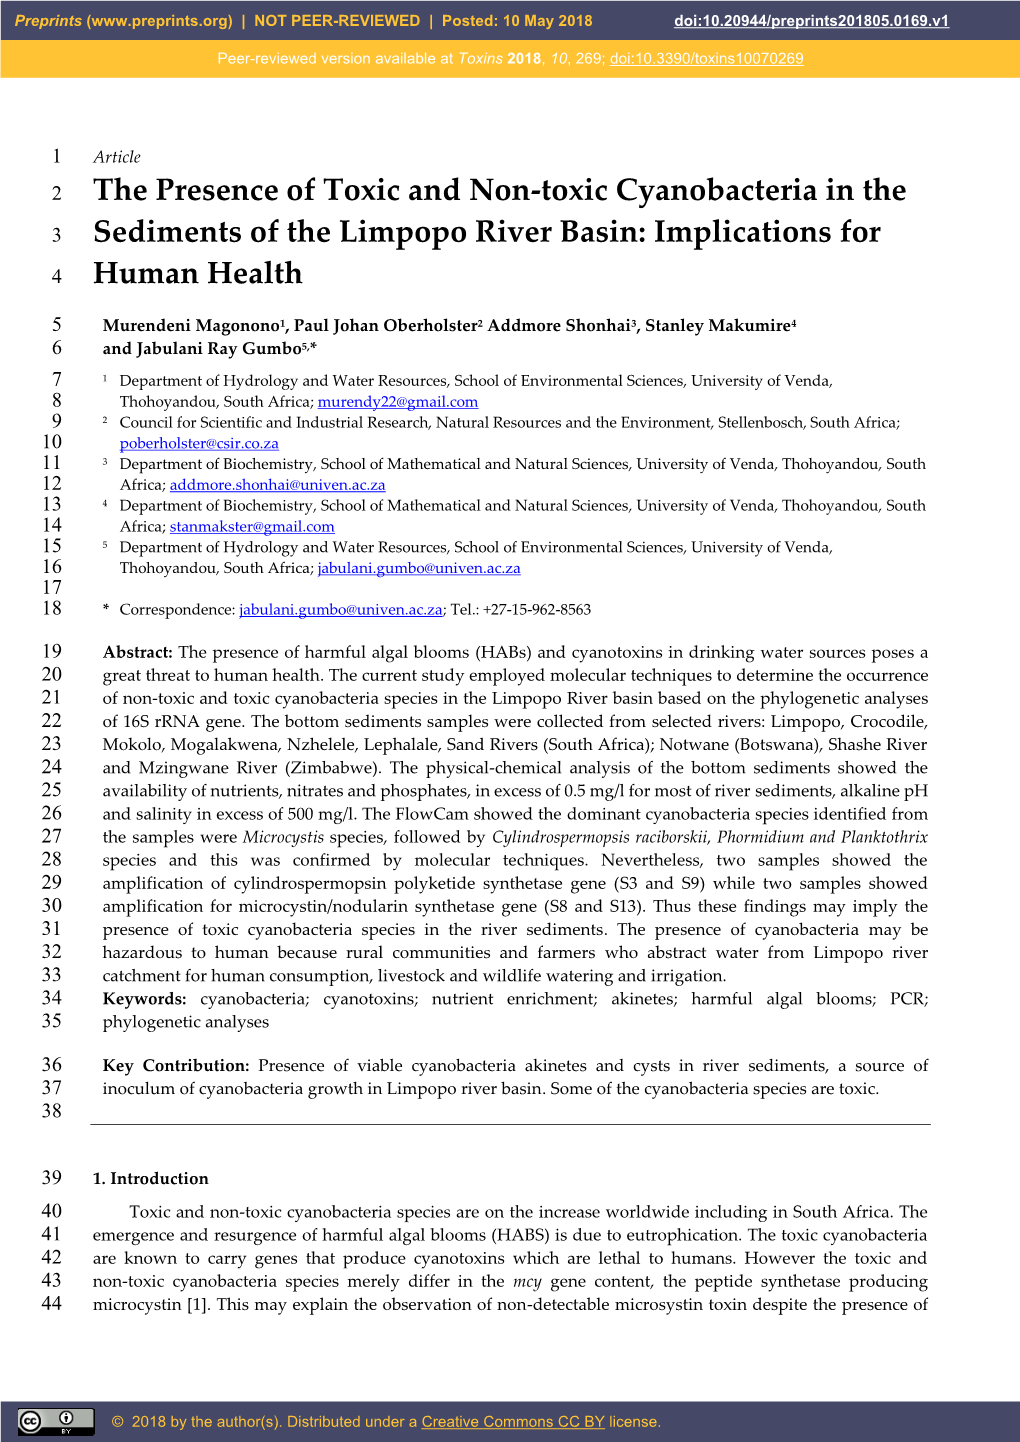 The Presence of Toxic and Non-Toxic Cyanobacteria in the 3 Sediments of the Limpopo River Basin: Implications for 4 Human Health